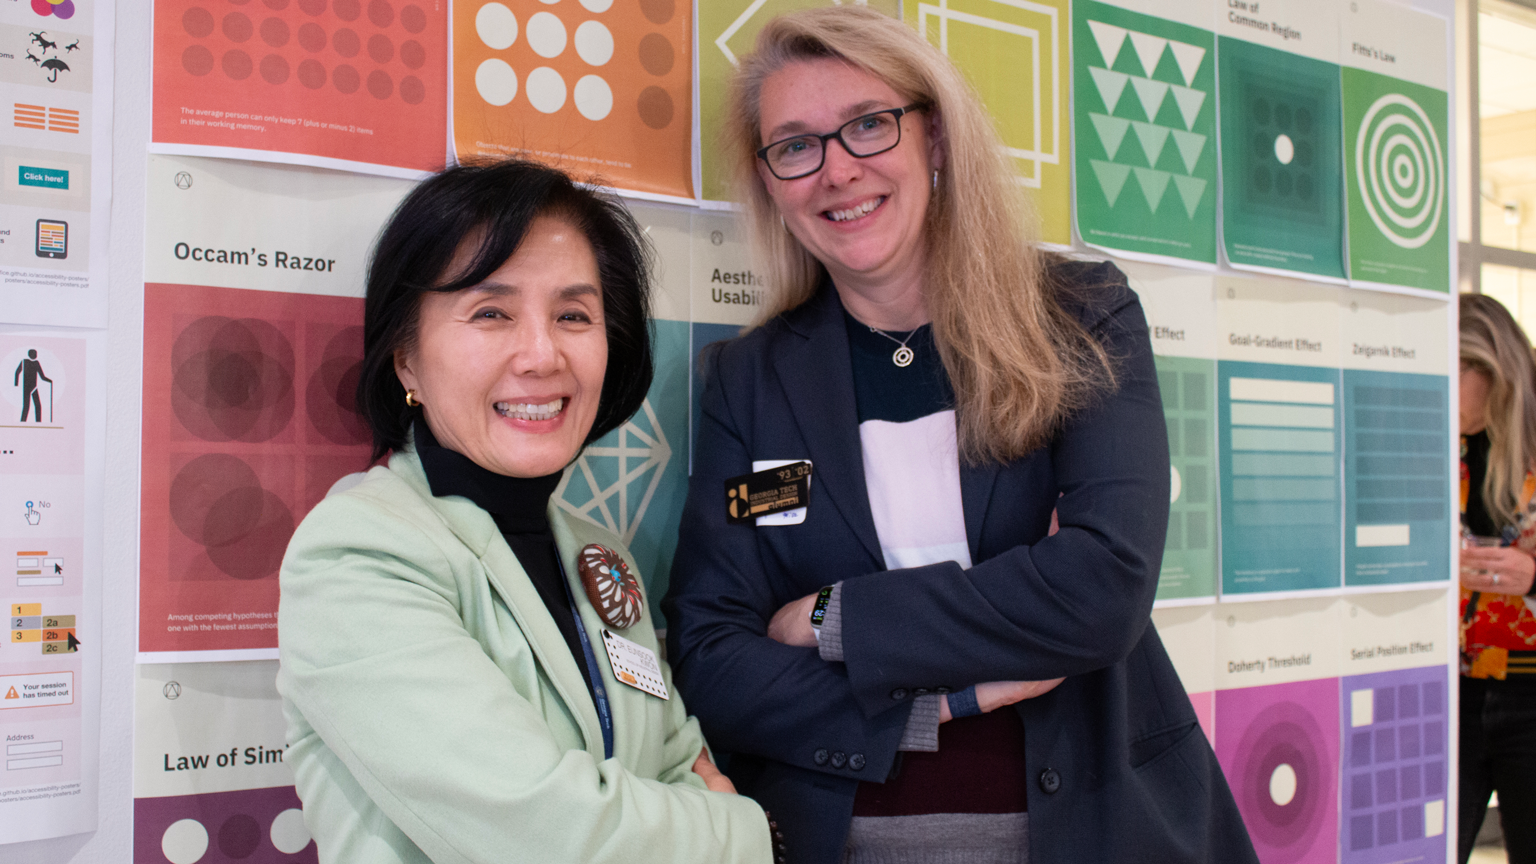 Dr EunSook Kwon, ID school chair, and Michelle Berryman, part-time instructor